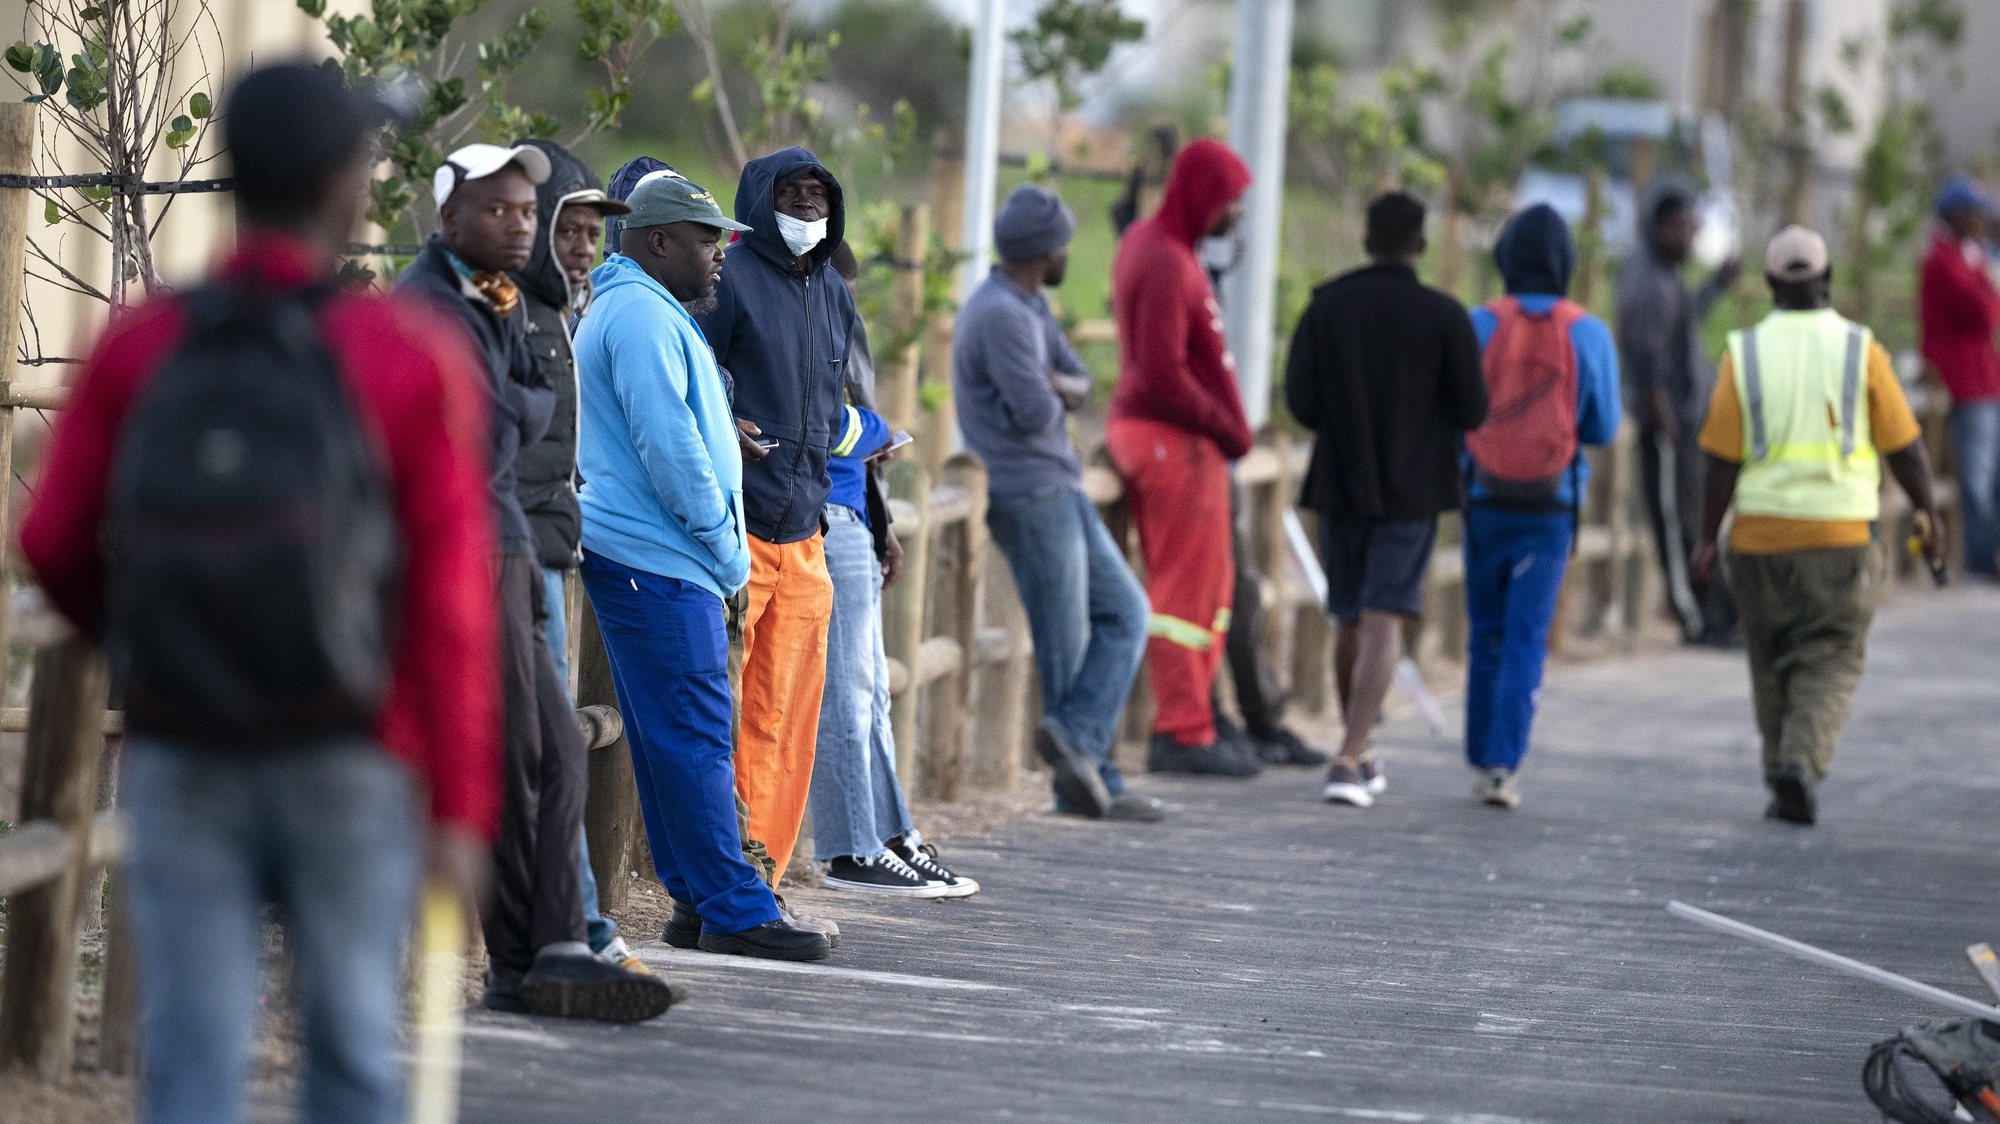 epa08508009 Men wait for work in the informal sector with around 200 other job seekers at a road junction in Cape Town, South Africa, 24 June 2020 (issued 25 June 2020). According to a report released this week by Statistics South Africa the unemployment rate has reached a record high level of 30.1 percent up from 29.1 percent in the final quarter of last year. Africa&#039;s biggest economy was in recession before the coronavirus pandemic but lockdowns have further negatively impacted businesses and employment opportunities. The informal sector provides employment to approximately 30 percent of South African workers according to the World Bank. Cape Town is the countries epicenter of coronavirus SARS-CoV-2 which causes the Covid-19 disease.  EPA/NIC BOTHMA ATTENTION: This Image is part of a PHOTO SET